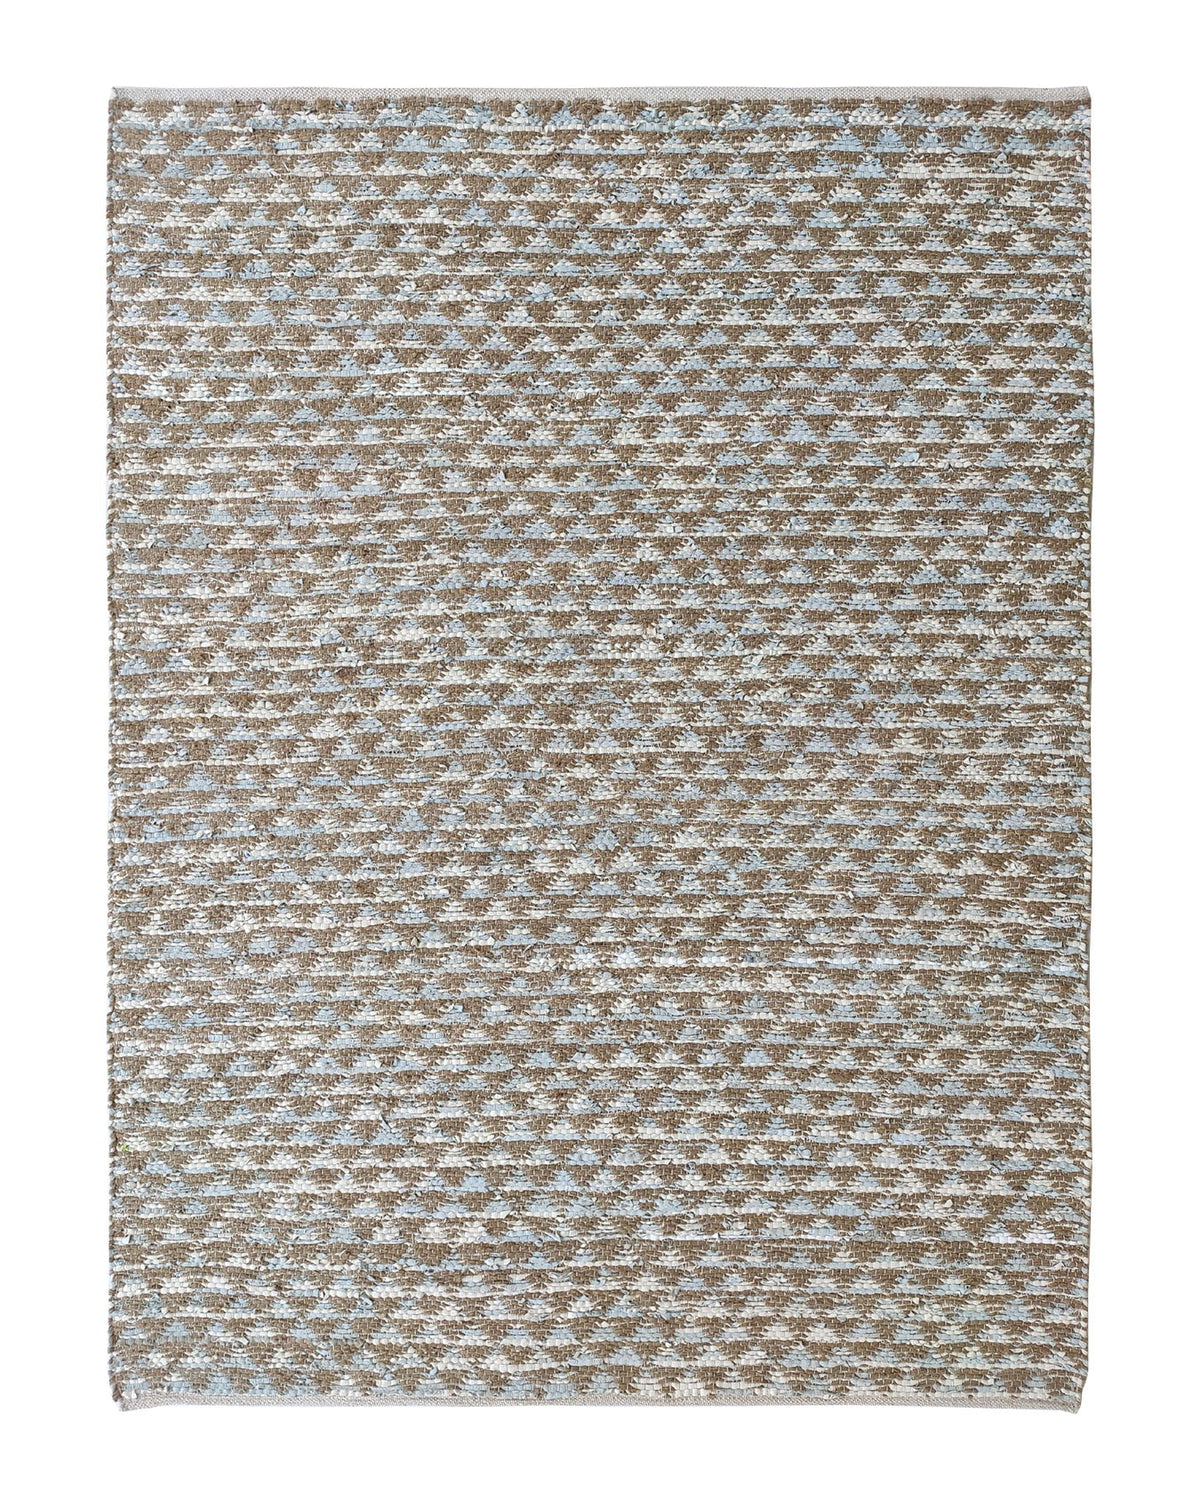 Hand Made Multi Pattern Woven Rug (2 Sizes)